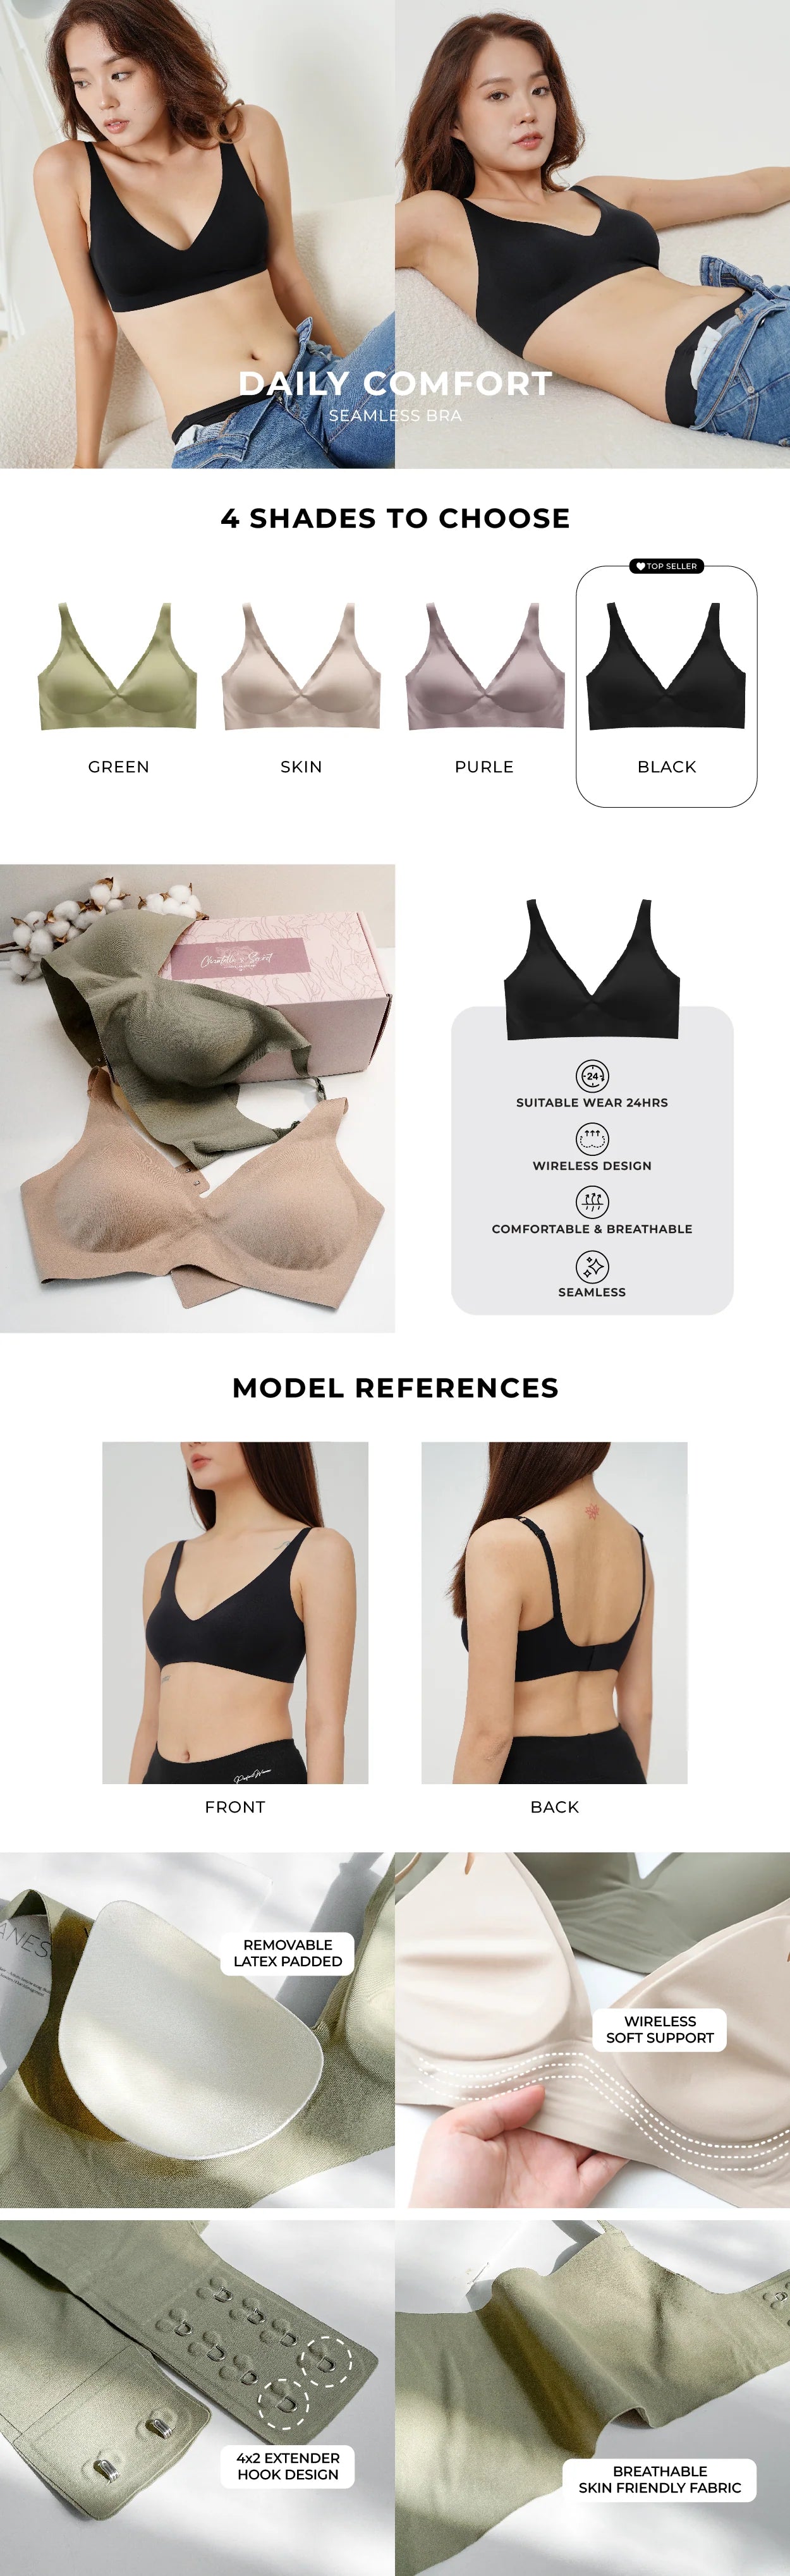 Chantelle's Secret daily comfort seamless bra in black, green, skin, and purple, featuring 24-hour wearability, wireless support, and breathable fabric.